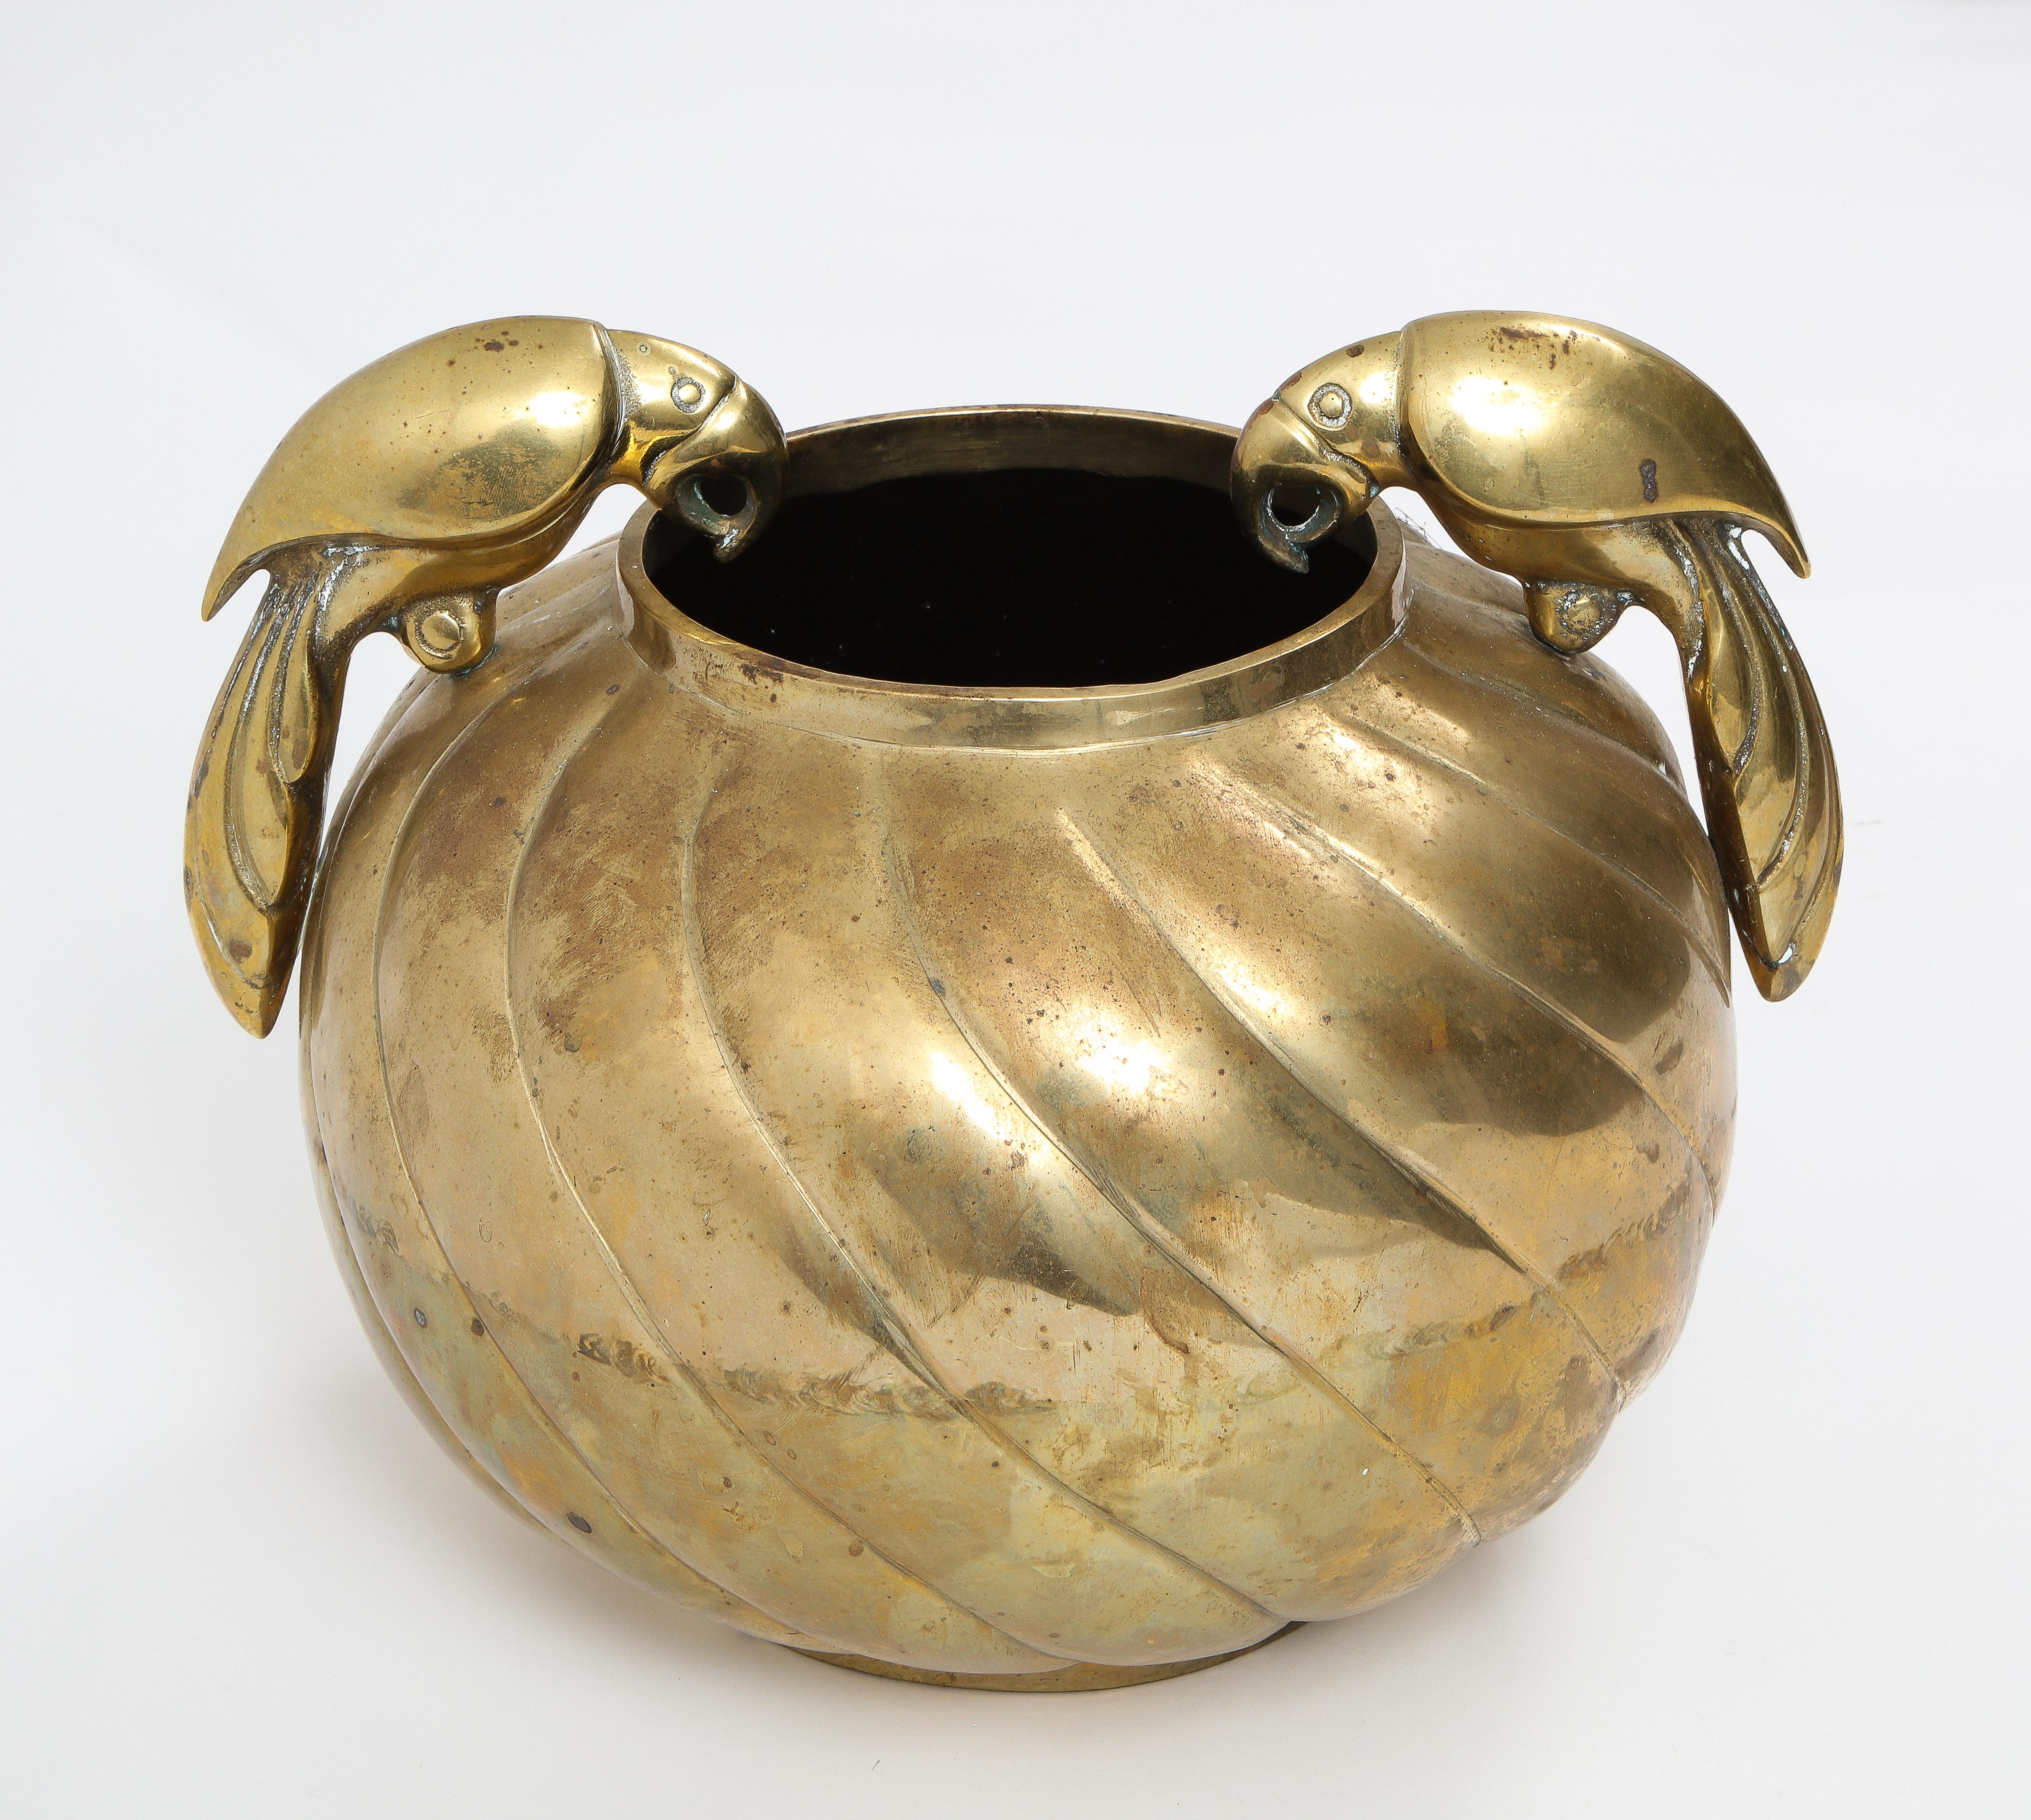 A stunning centerpiece in cast bronze with a grooved motif adorned with solid bronze cast parrots.